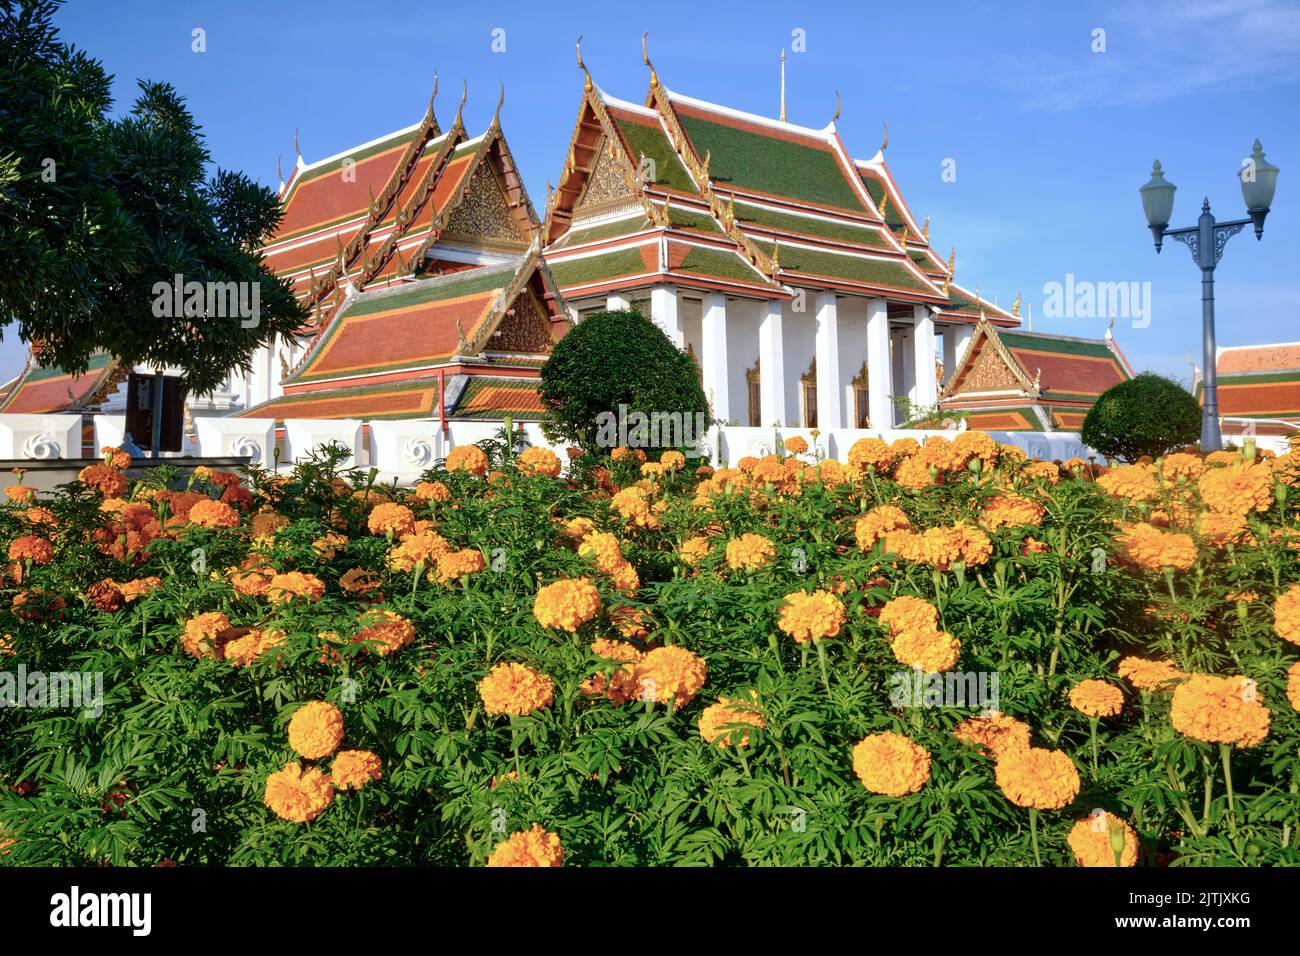 Wat Ratchanadta, a landmark Buddhist temple in Bangkok, Thailand, with marigold flowers from an adjacent park in the foreground Stock Photo